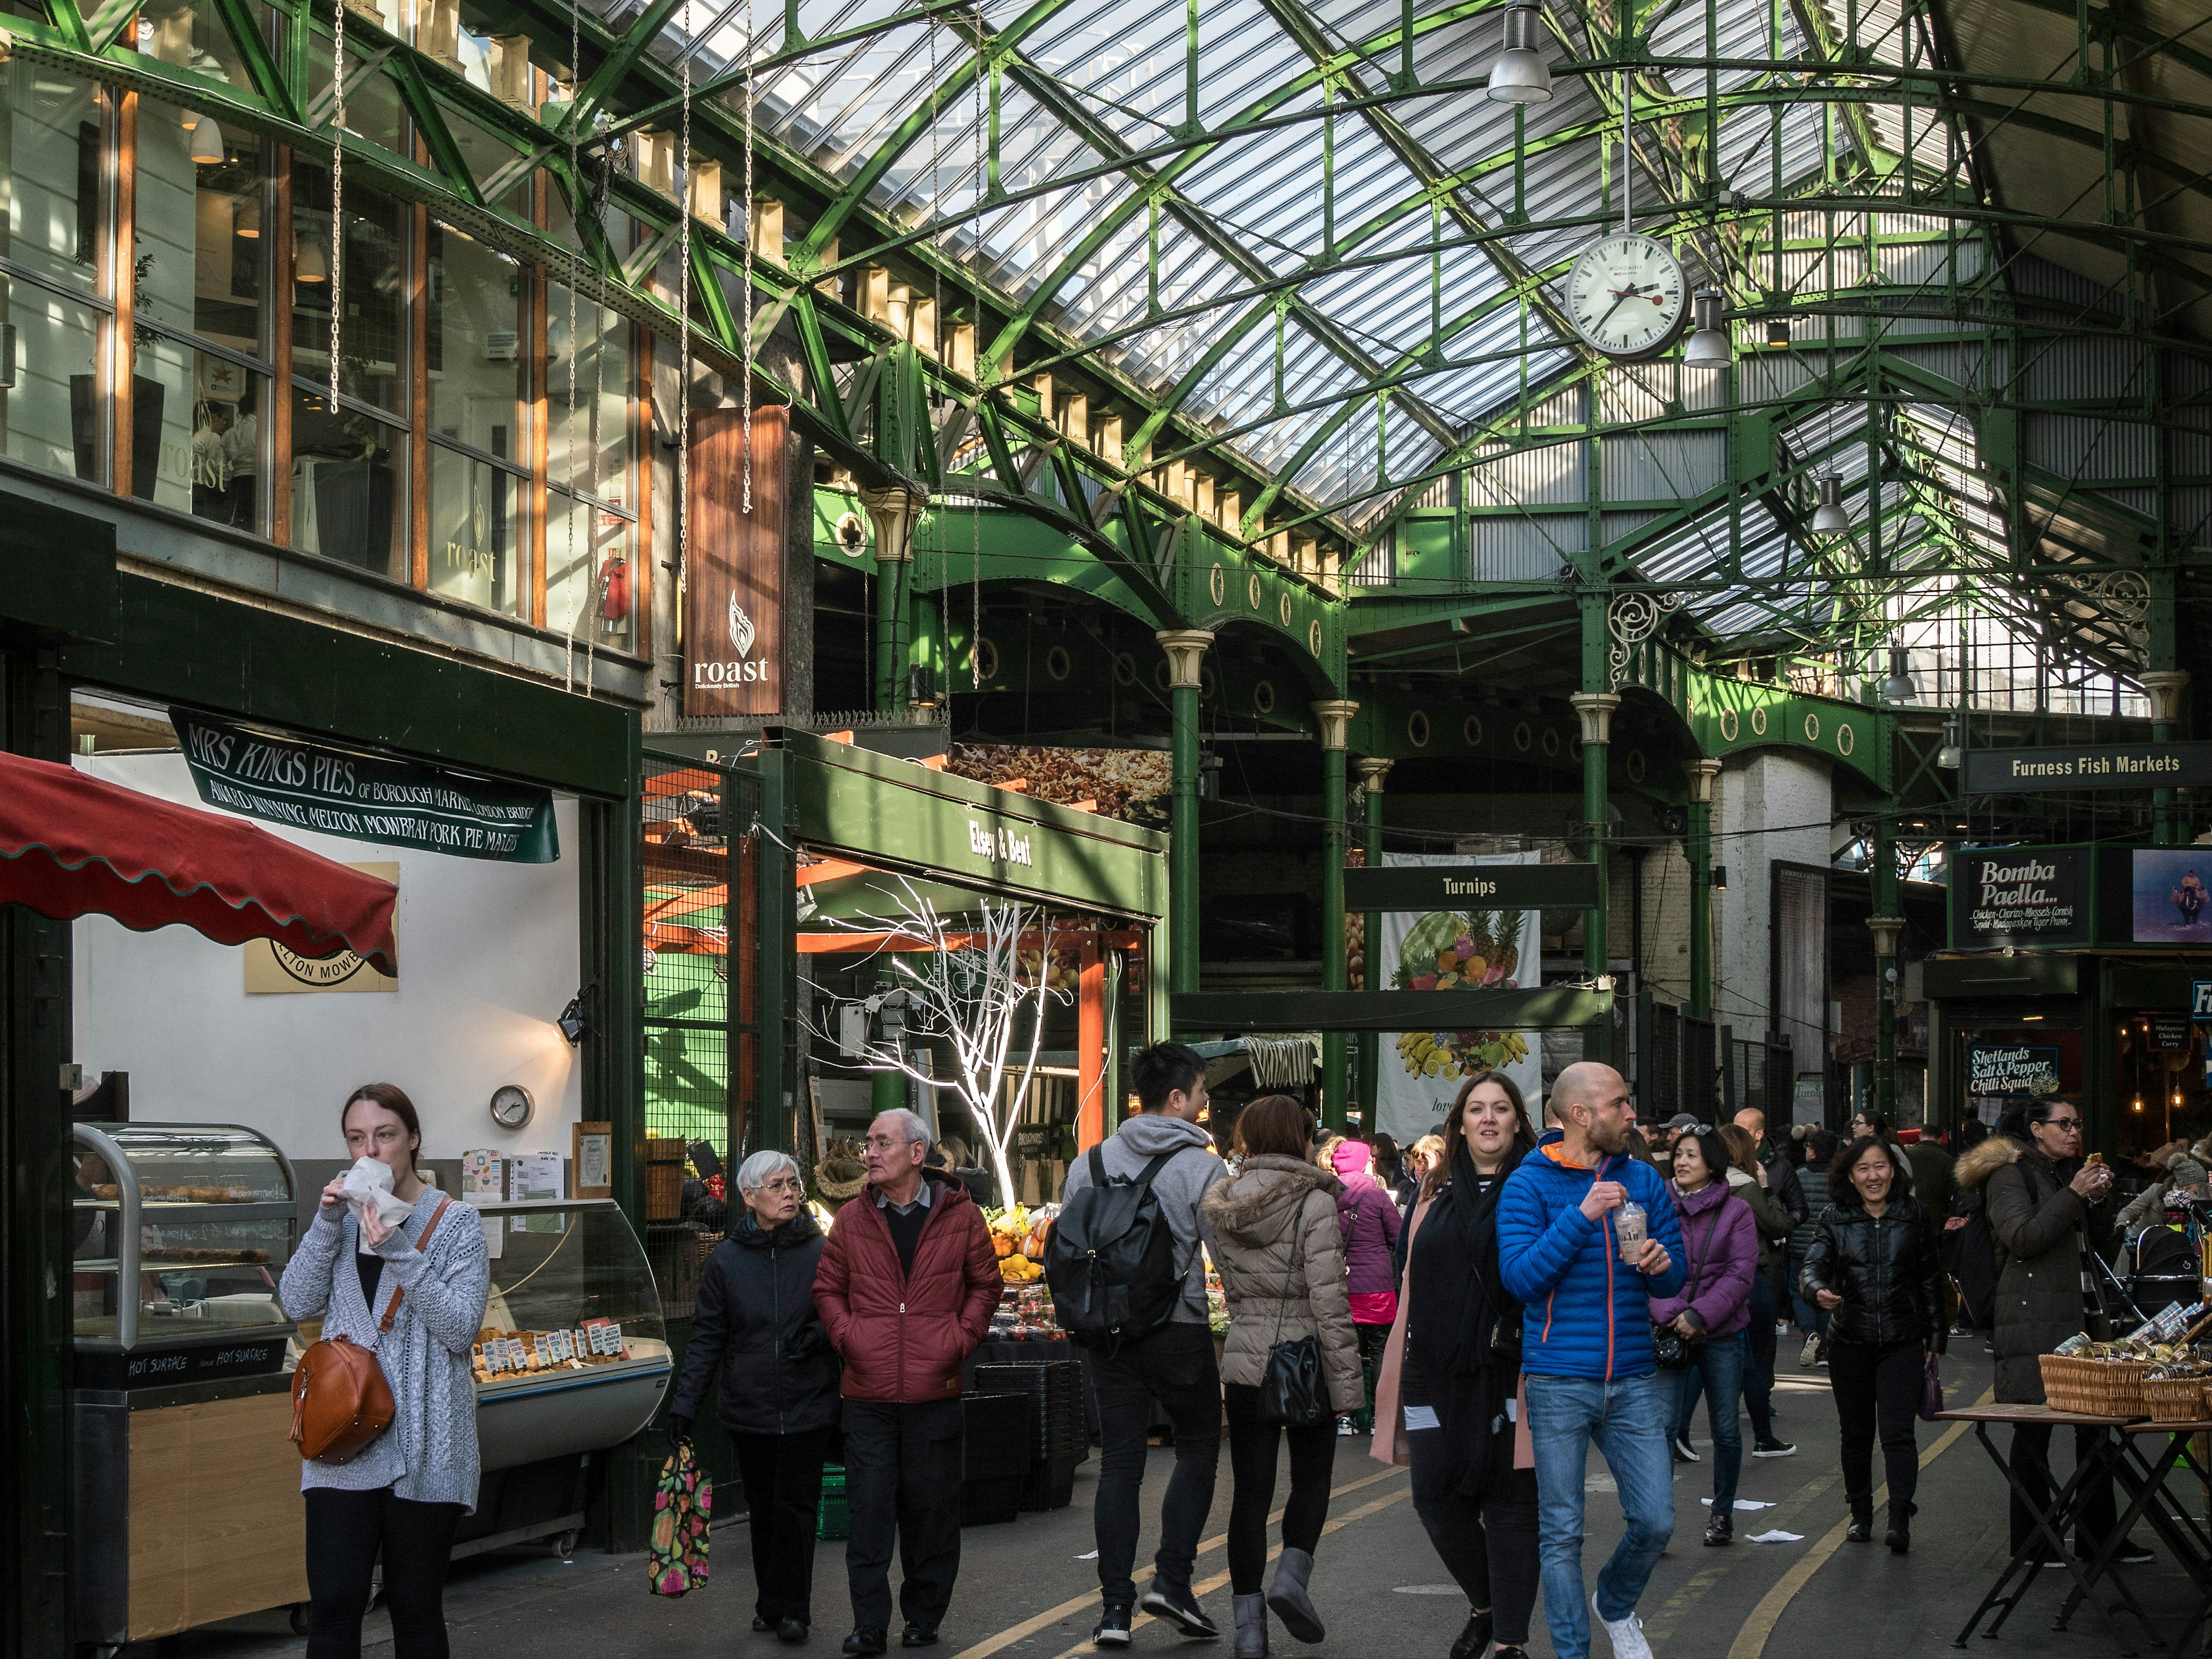 People exploring the covered Borough Food Market in London